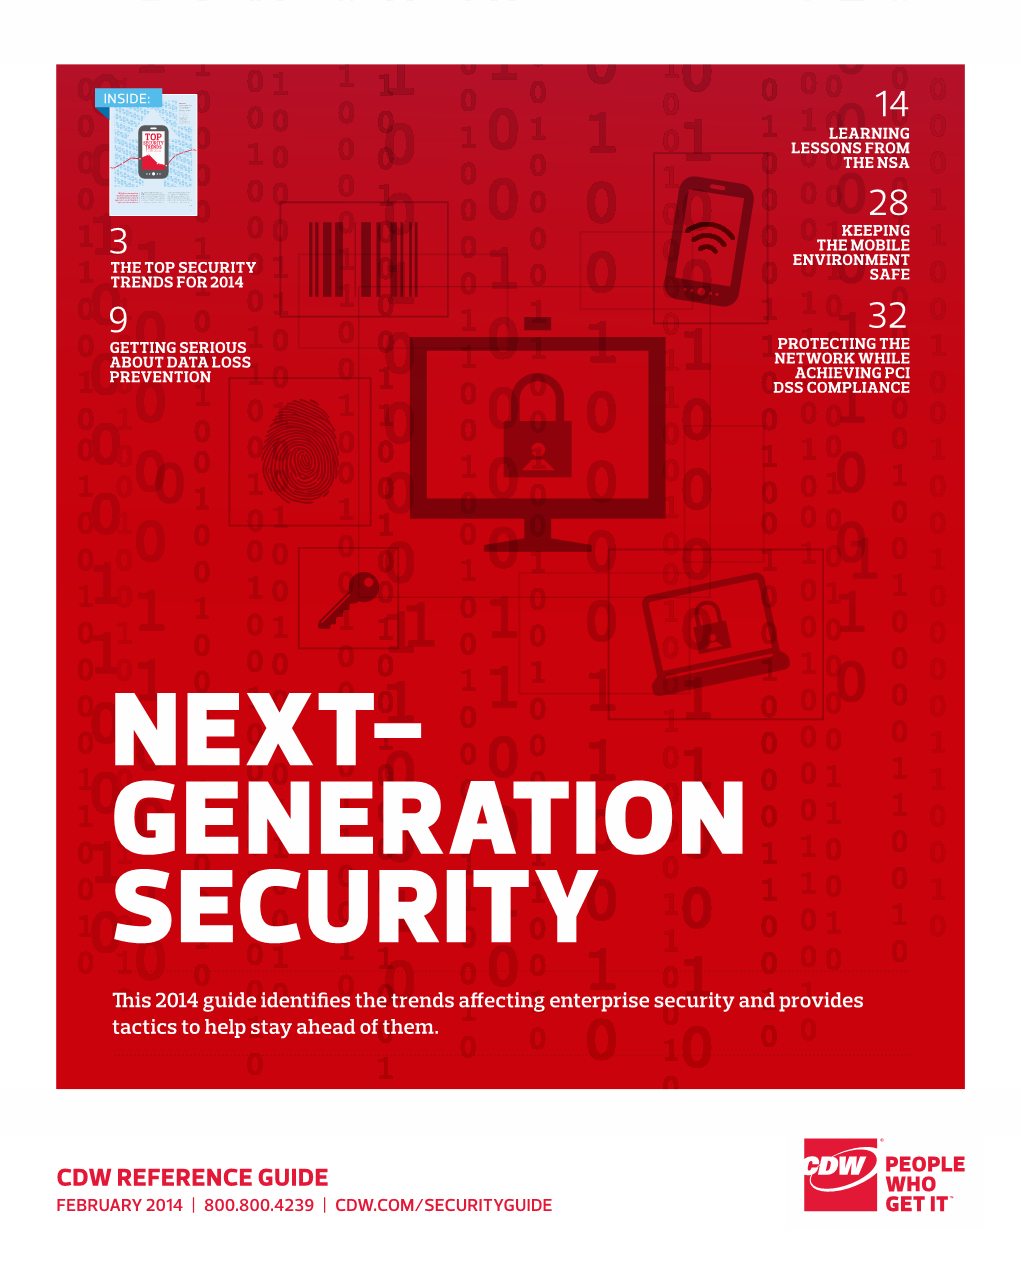 Next-Generation Security Reference Guide